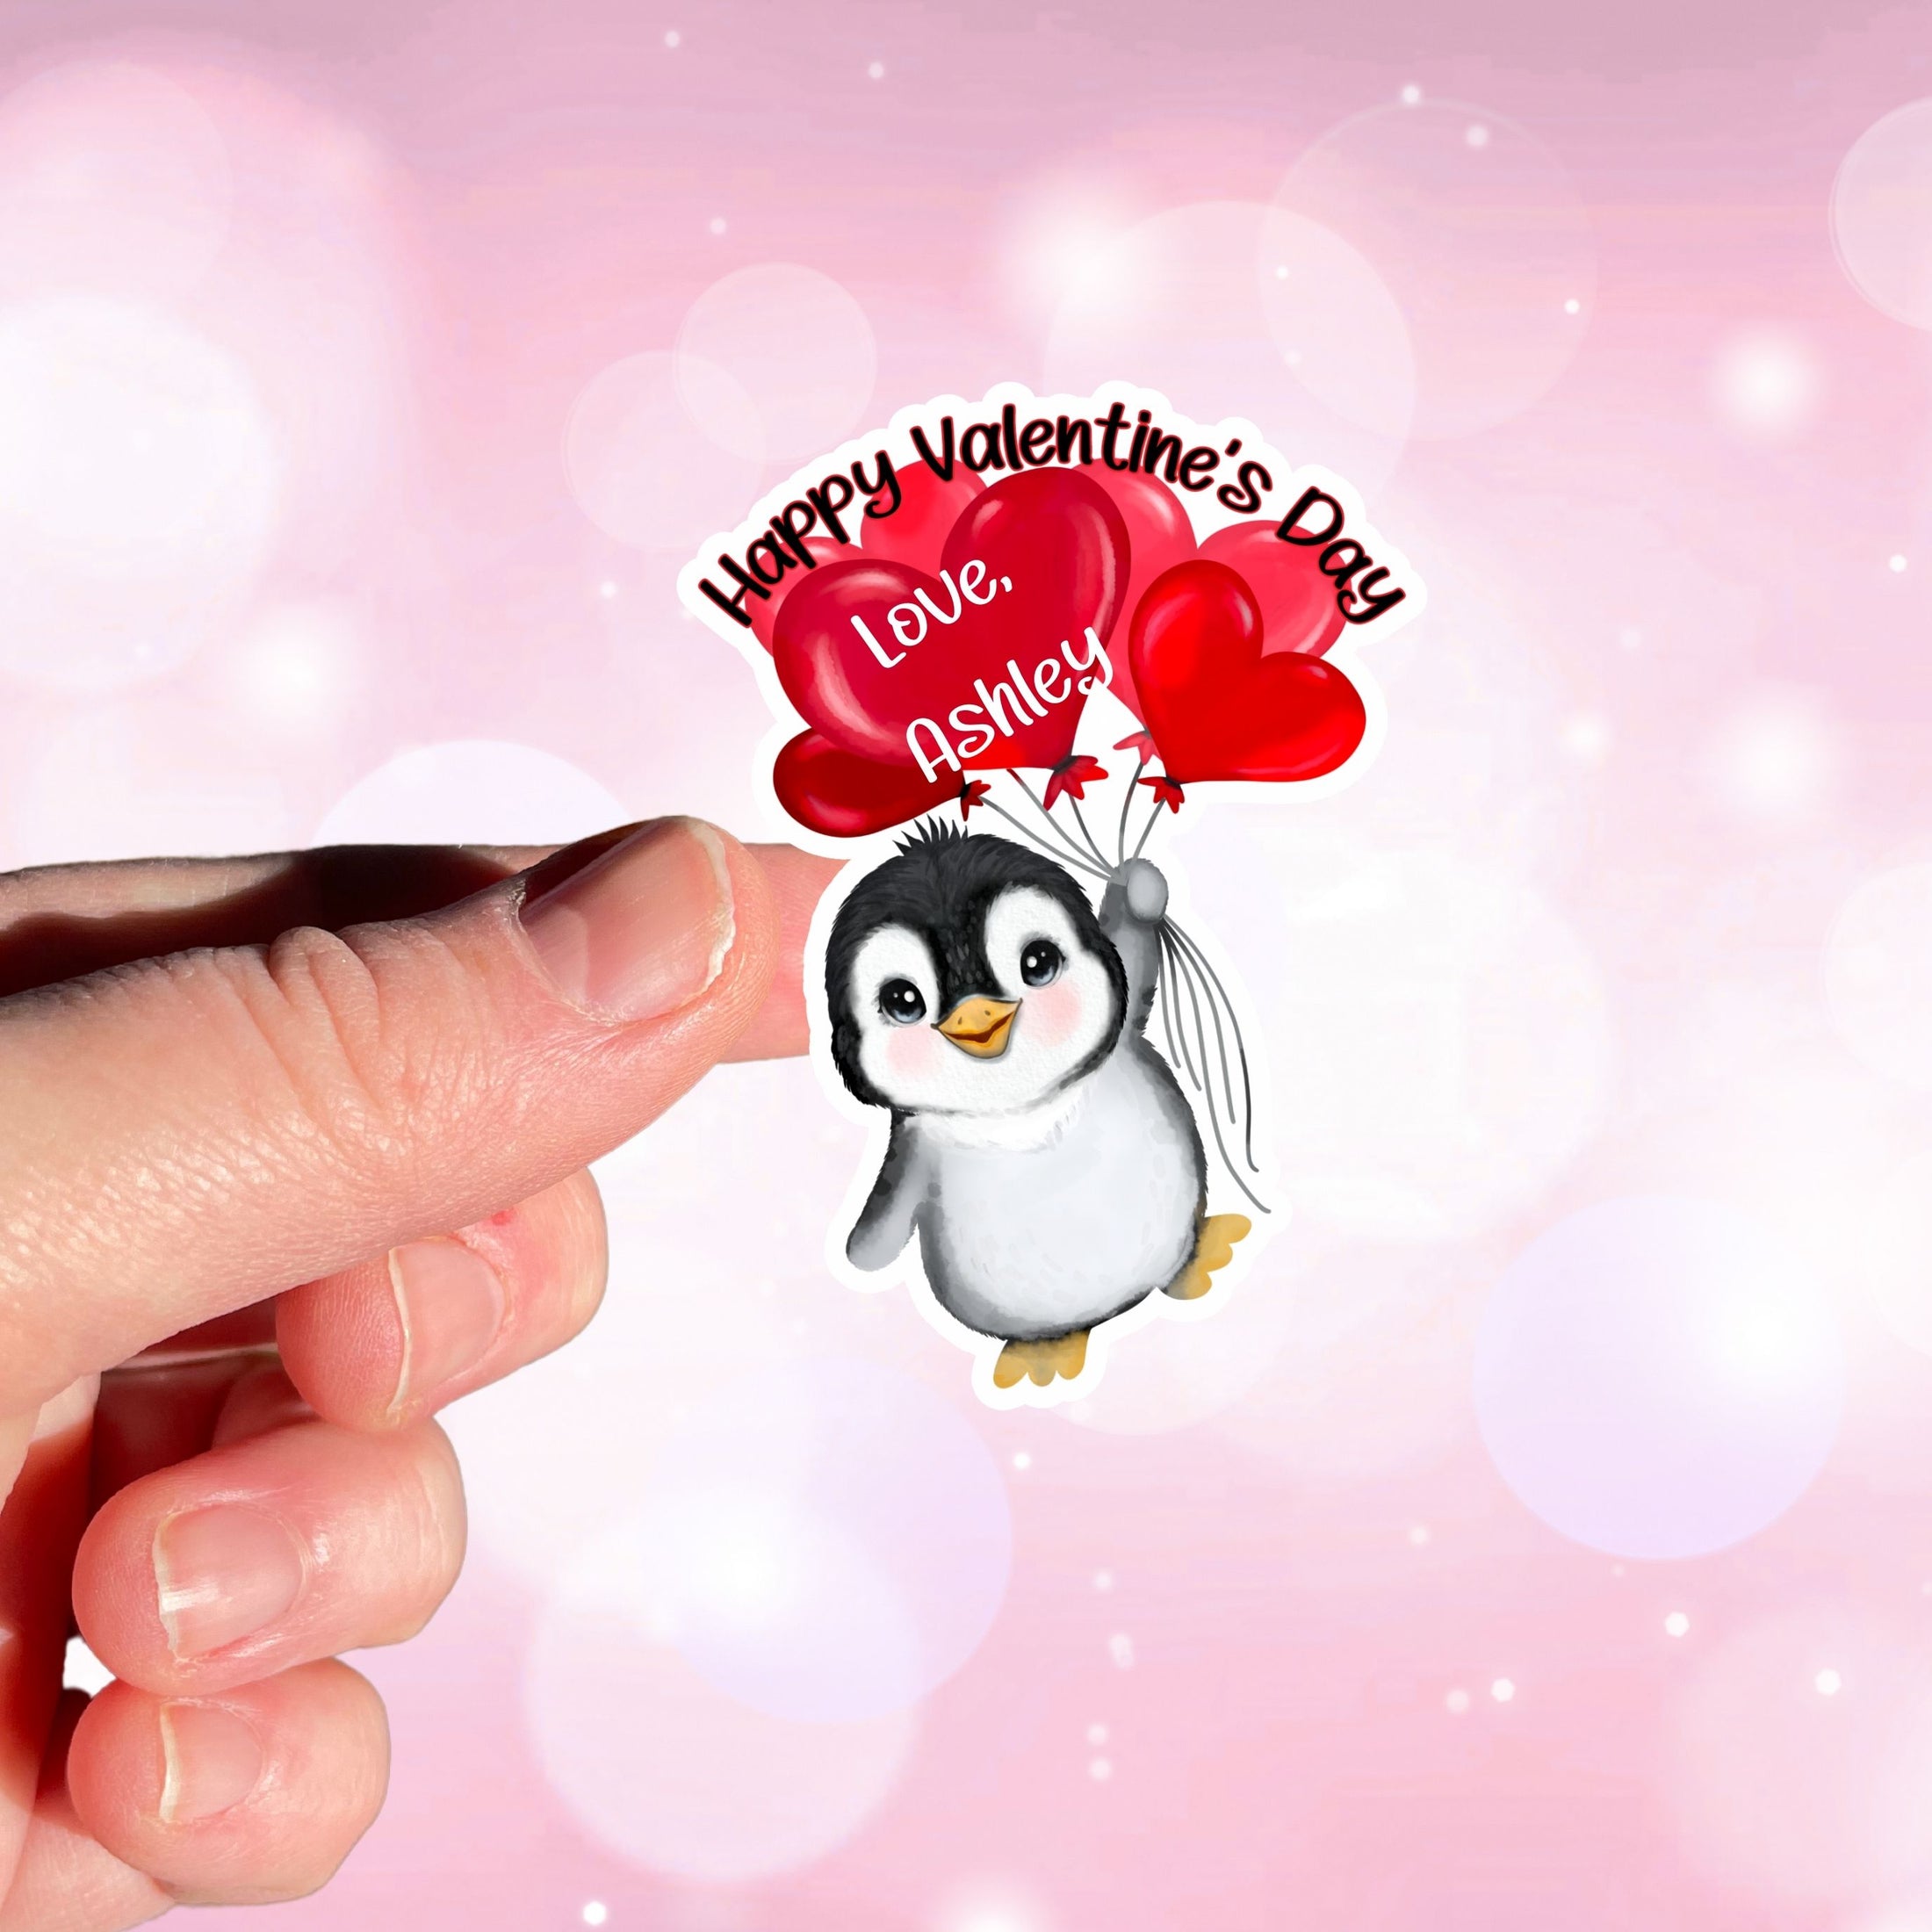 This image shows a hand holding the personalized valentine sticker.